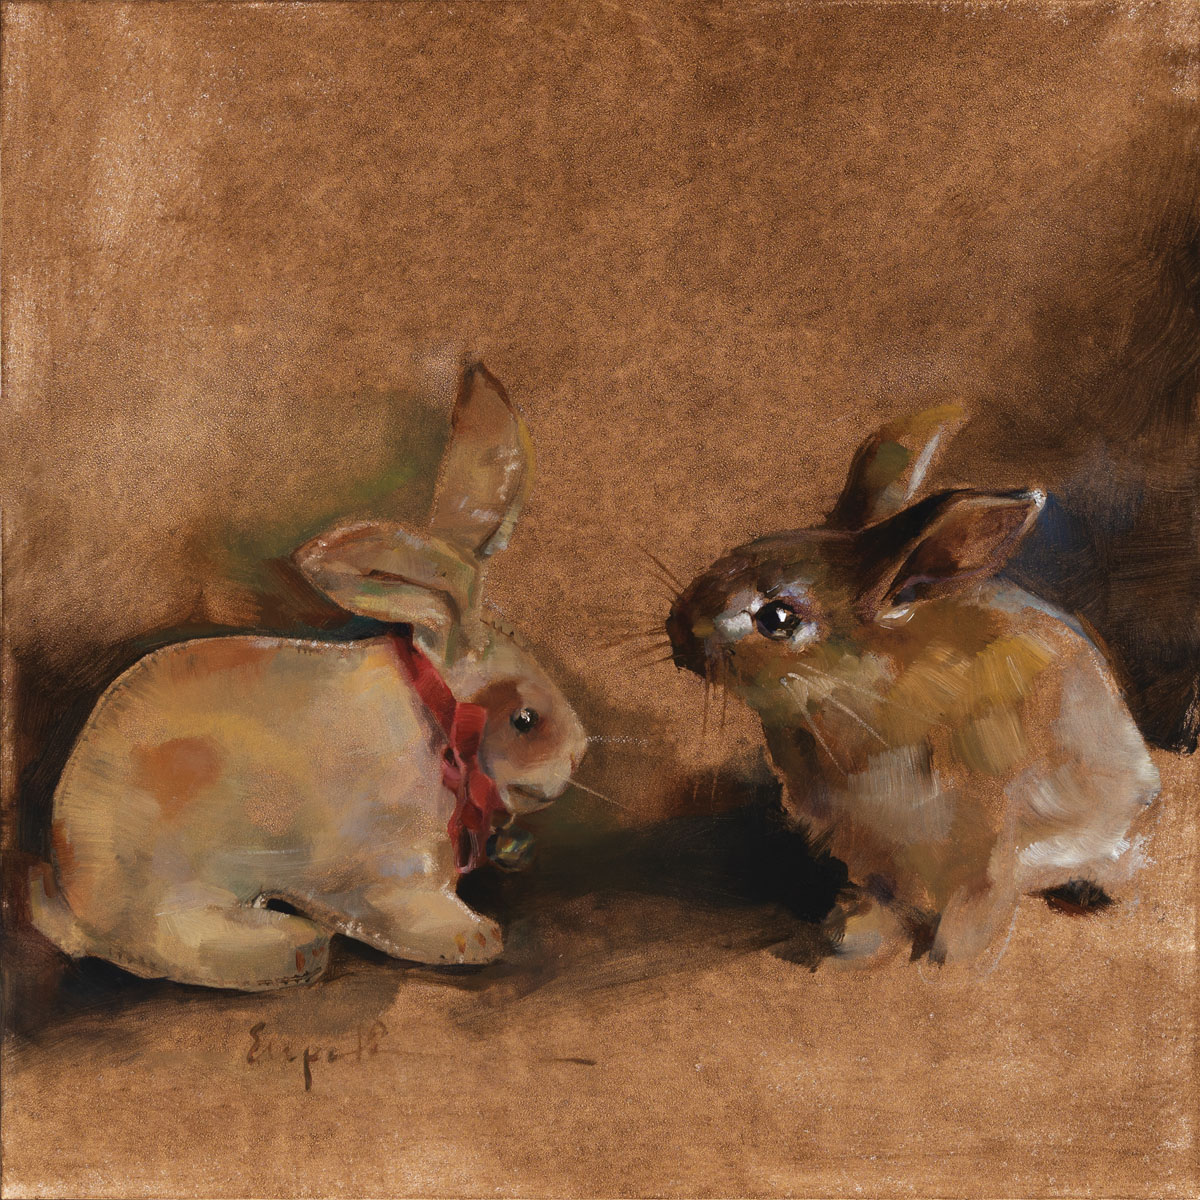 Bun RabbitCopyright © by Elspeth C. Young  All Rights Reservedby Elspeth C. Young, oi...